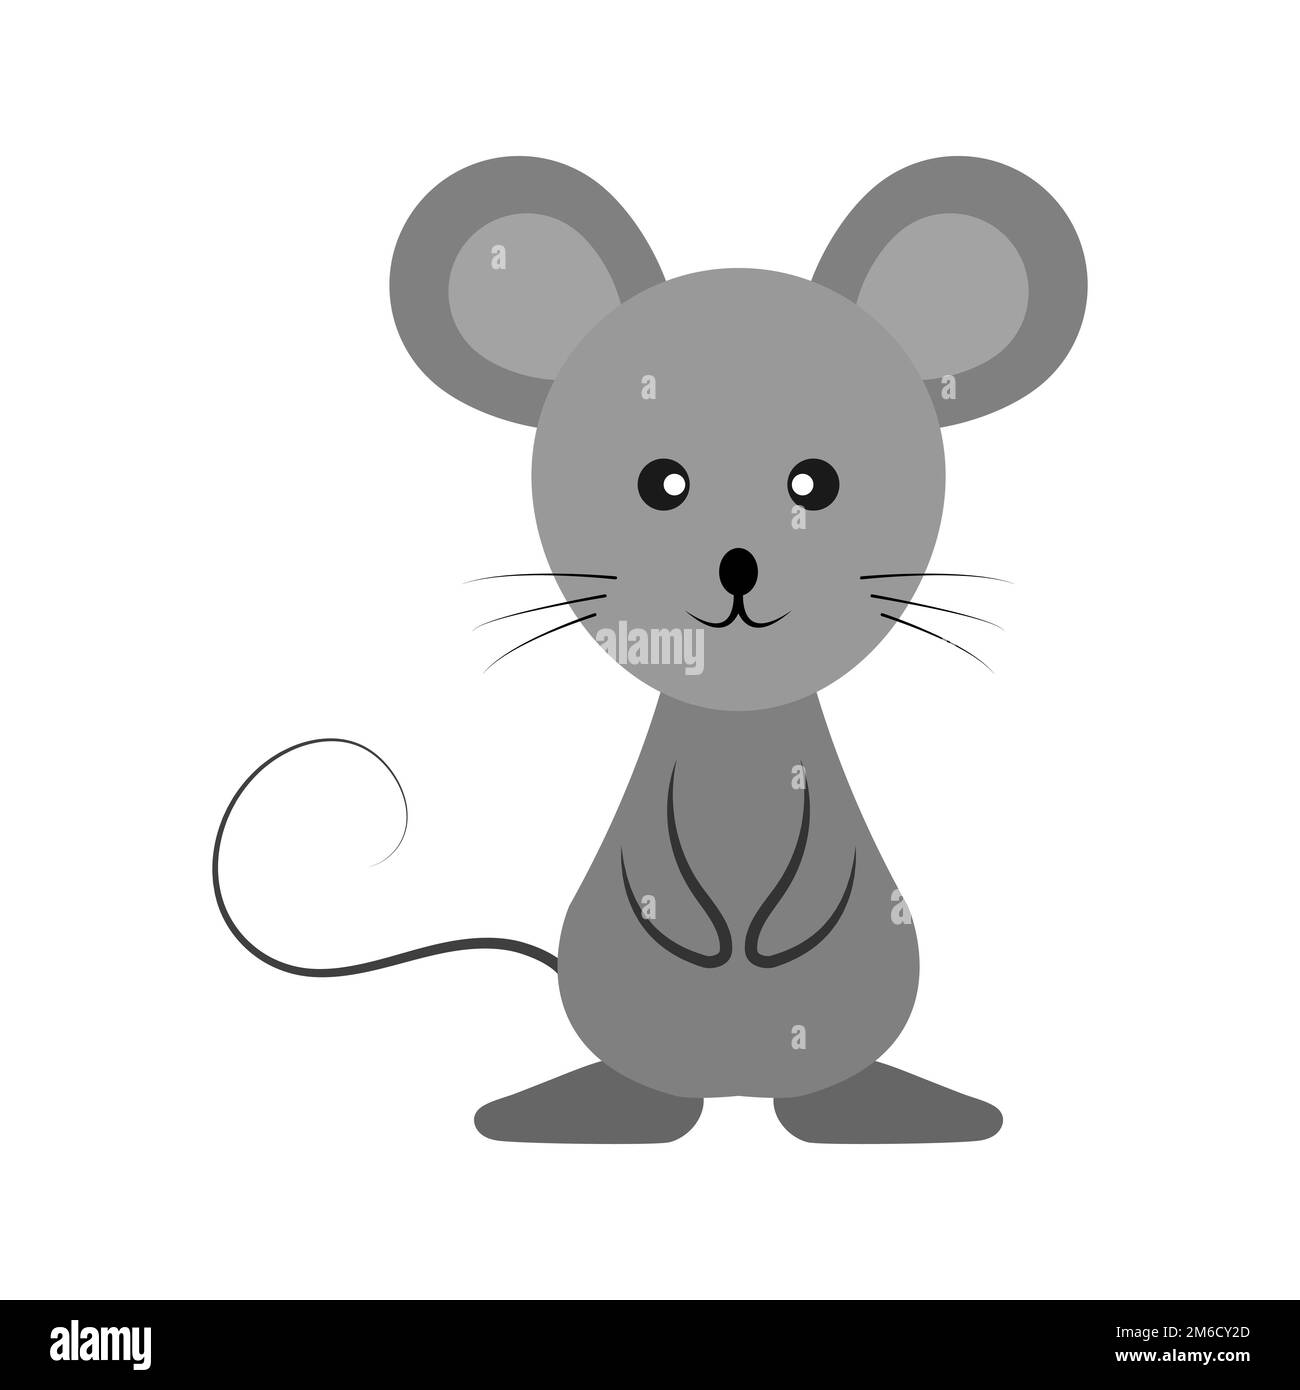 Simple drawing of a gray cartoon mouse, animal Stock Photo